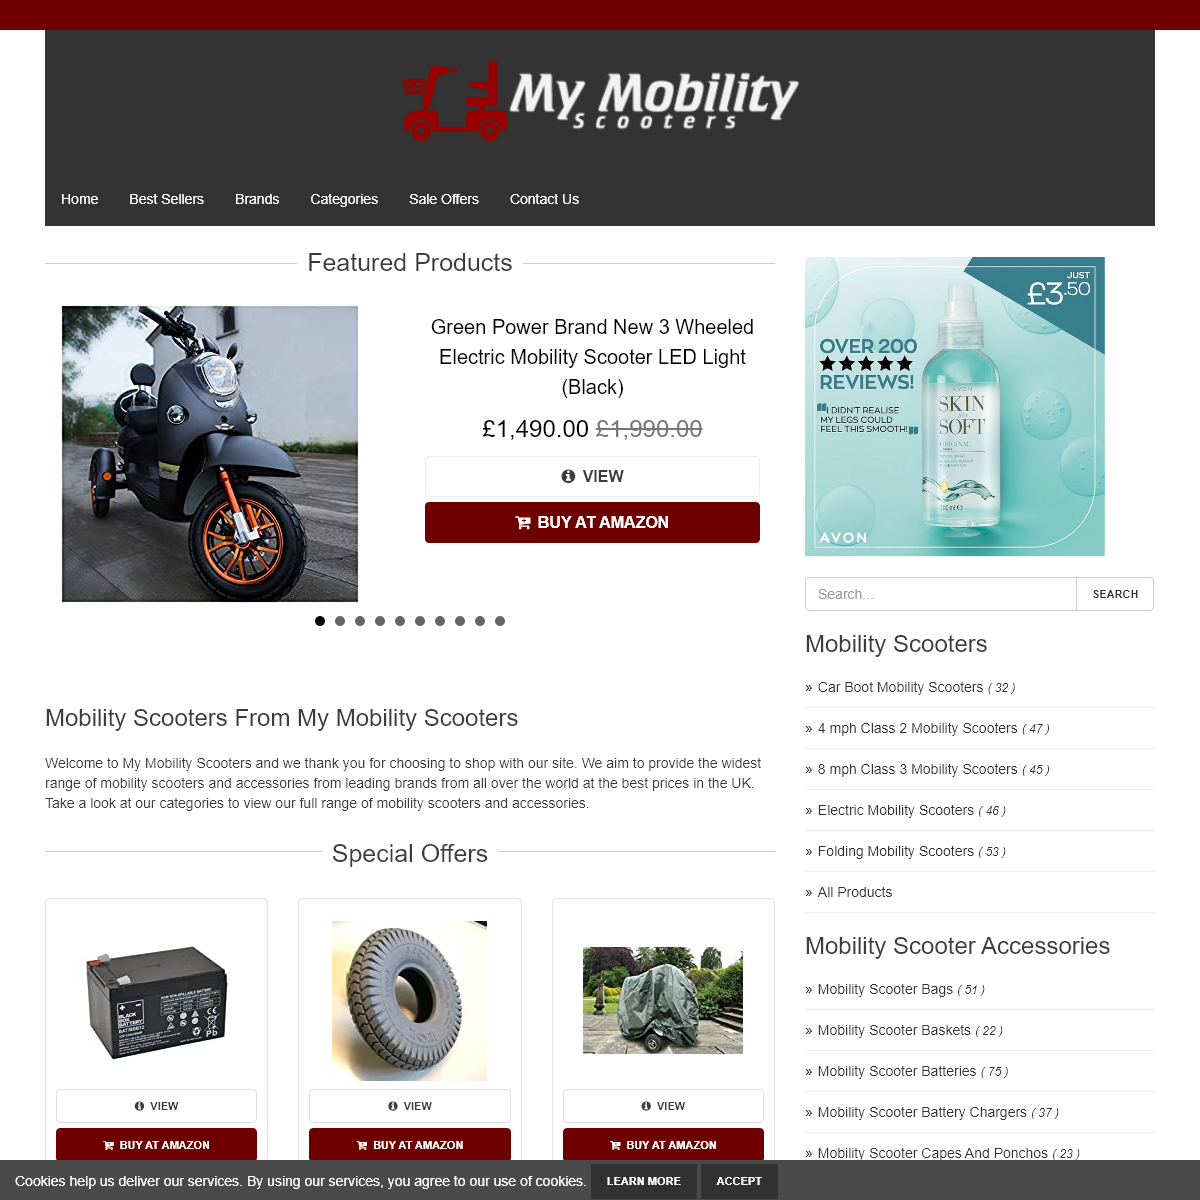 A complete backup of mymobilityscooters.co.uk